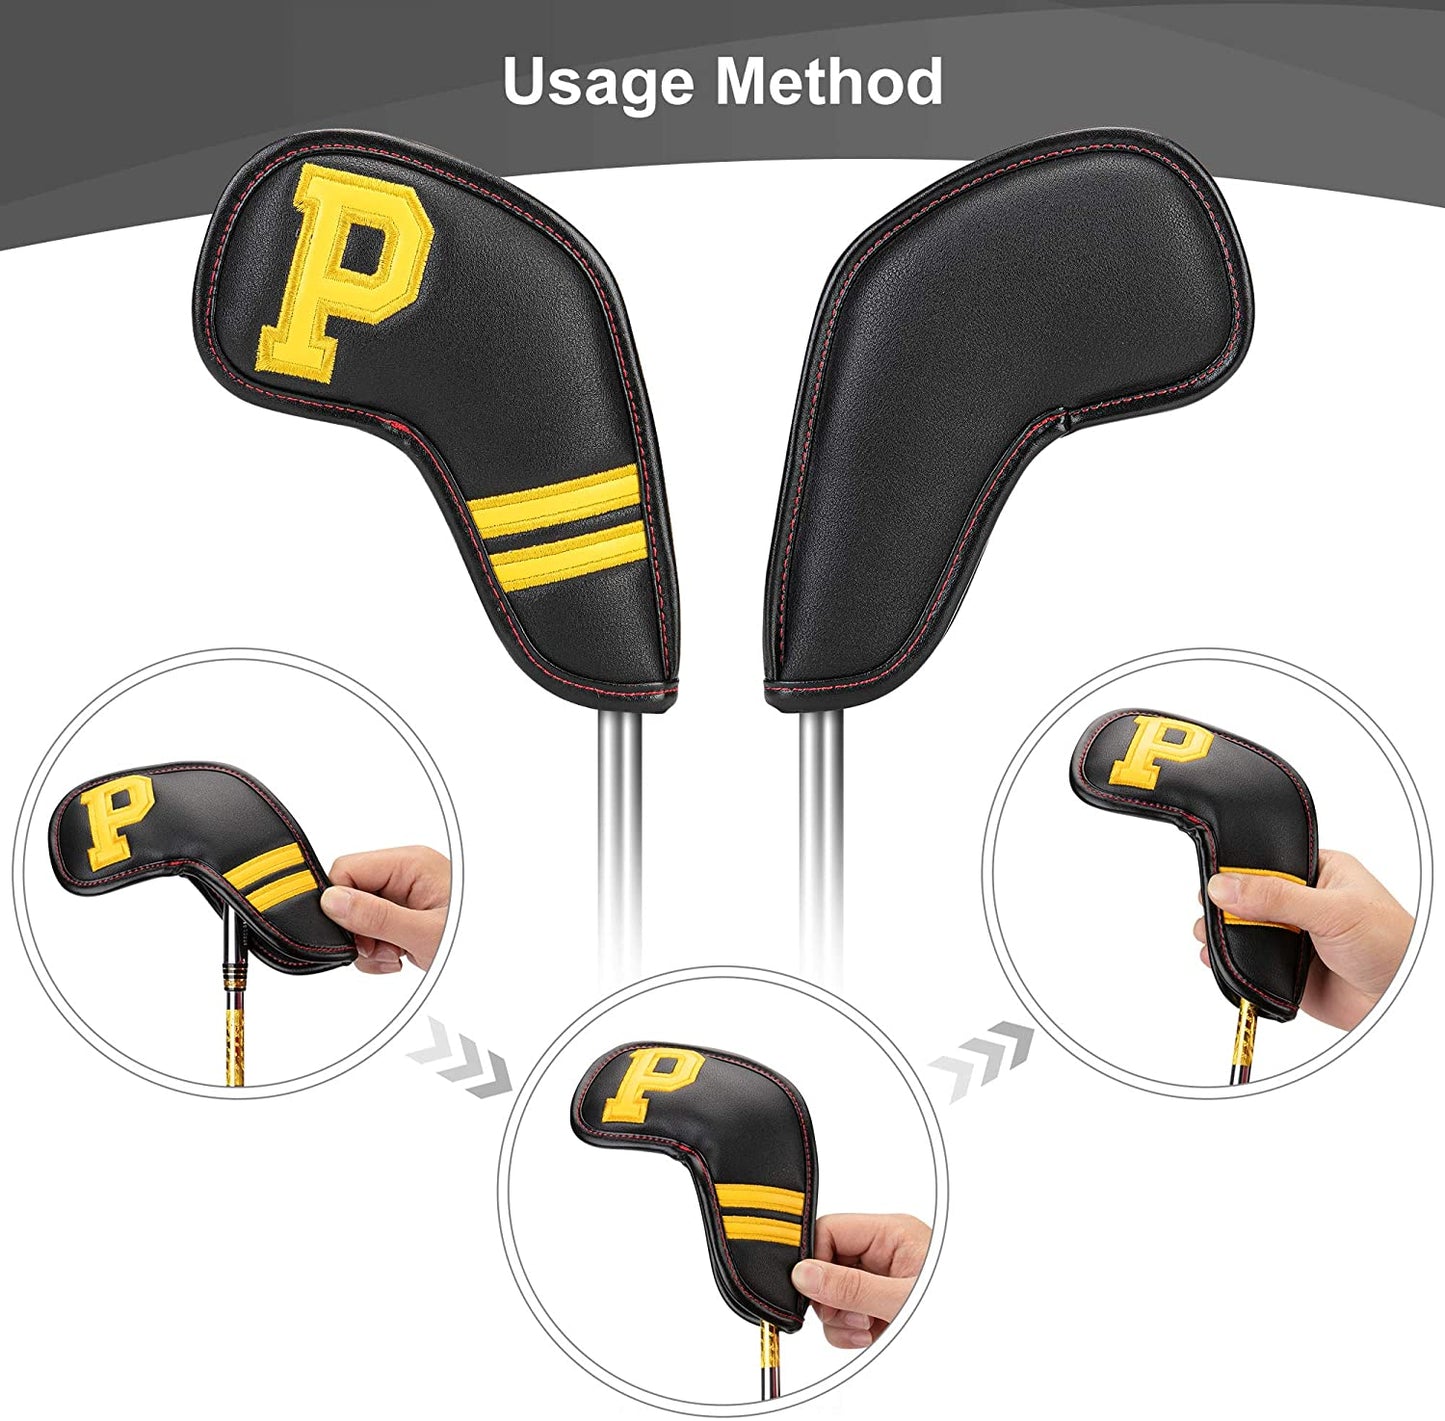 Zenesty Golf Iron Head Covers Set for Right Handed Black Color PU Leather 11pcs/lot (Including 4 5 6 7 8 9 Pw Aw Sw Lw X) Number Embroideried Moderately Thick Waterproof Fit Most Brands